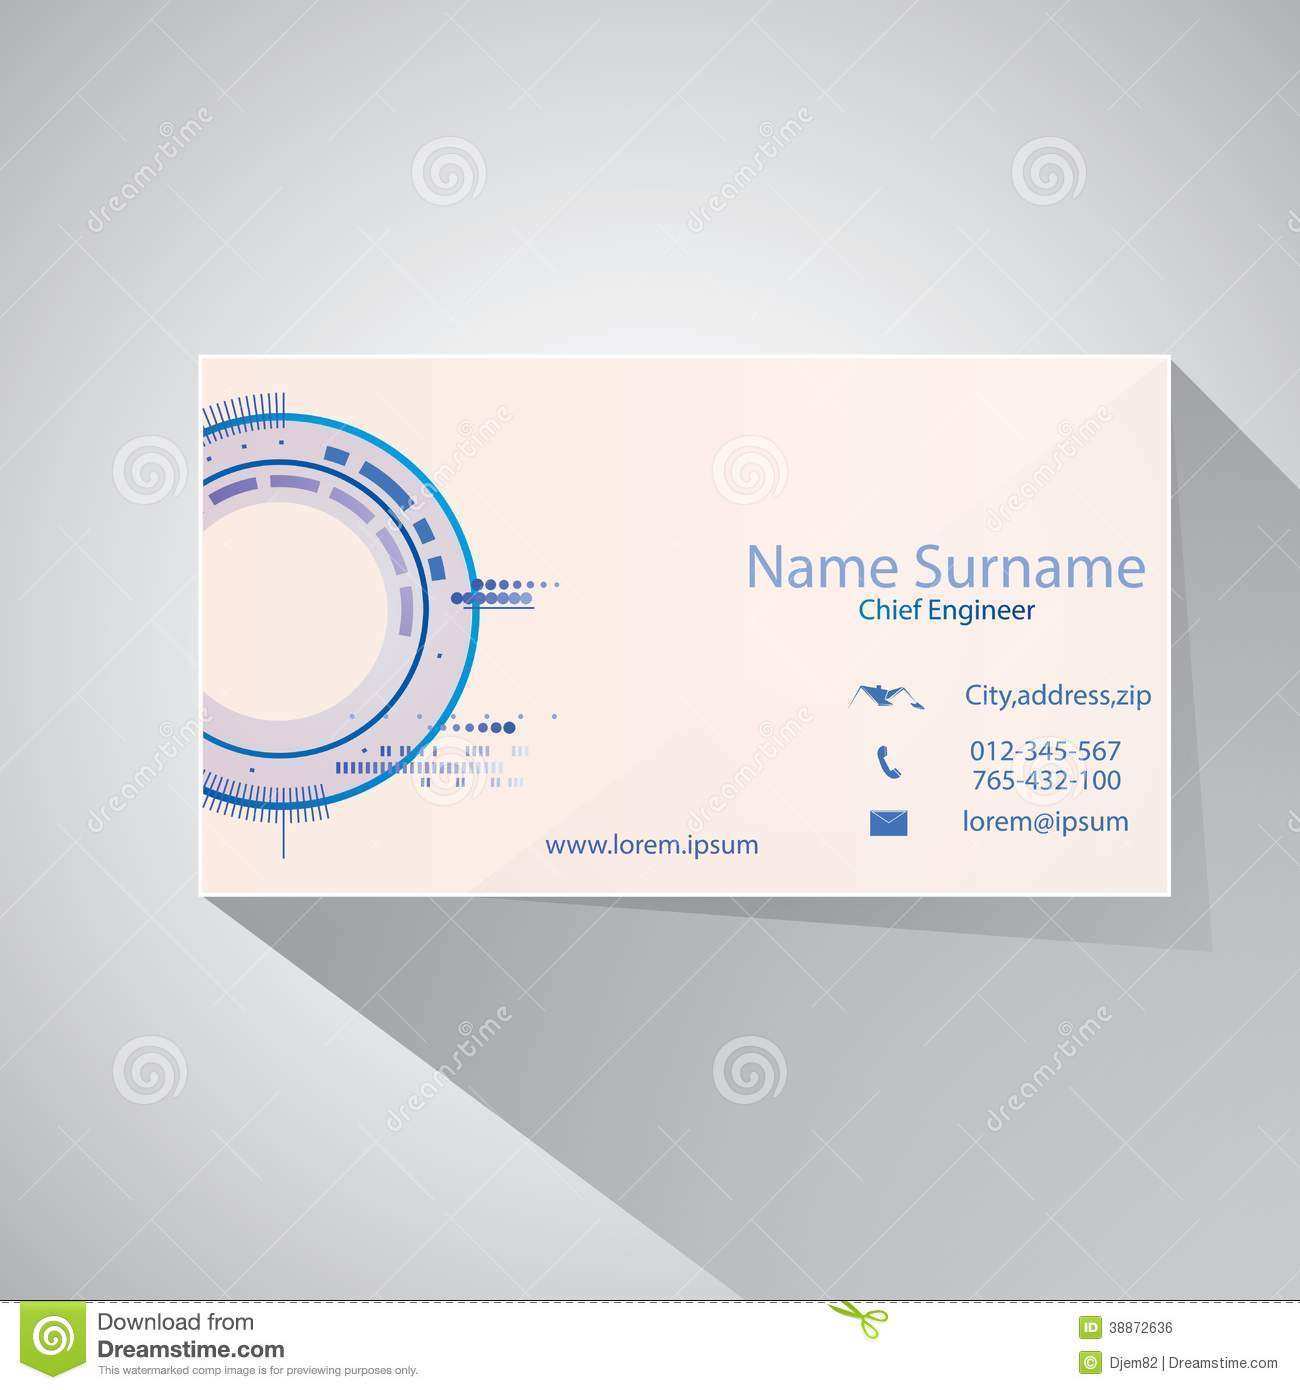 45 Visiting Business Card Template Engineering in Photoshop for Business Card Template Engineering